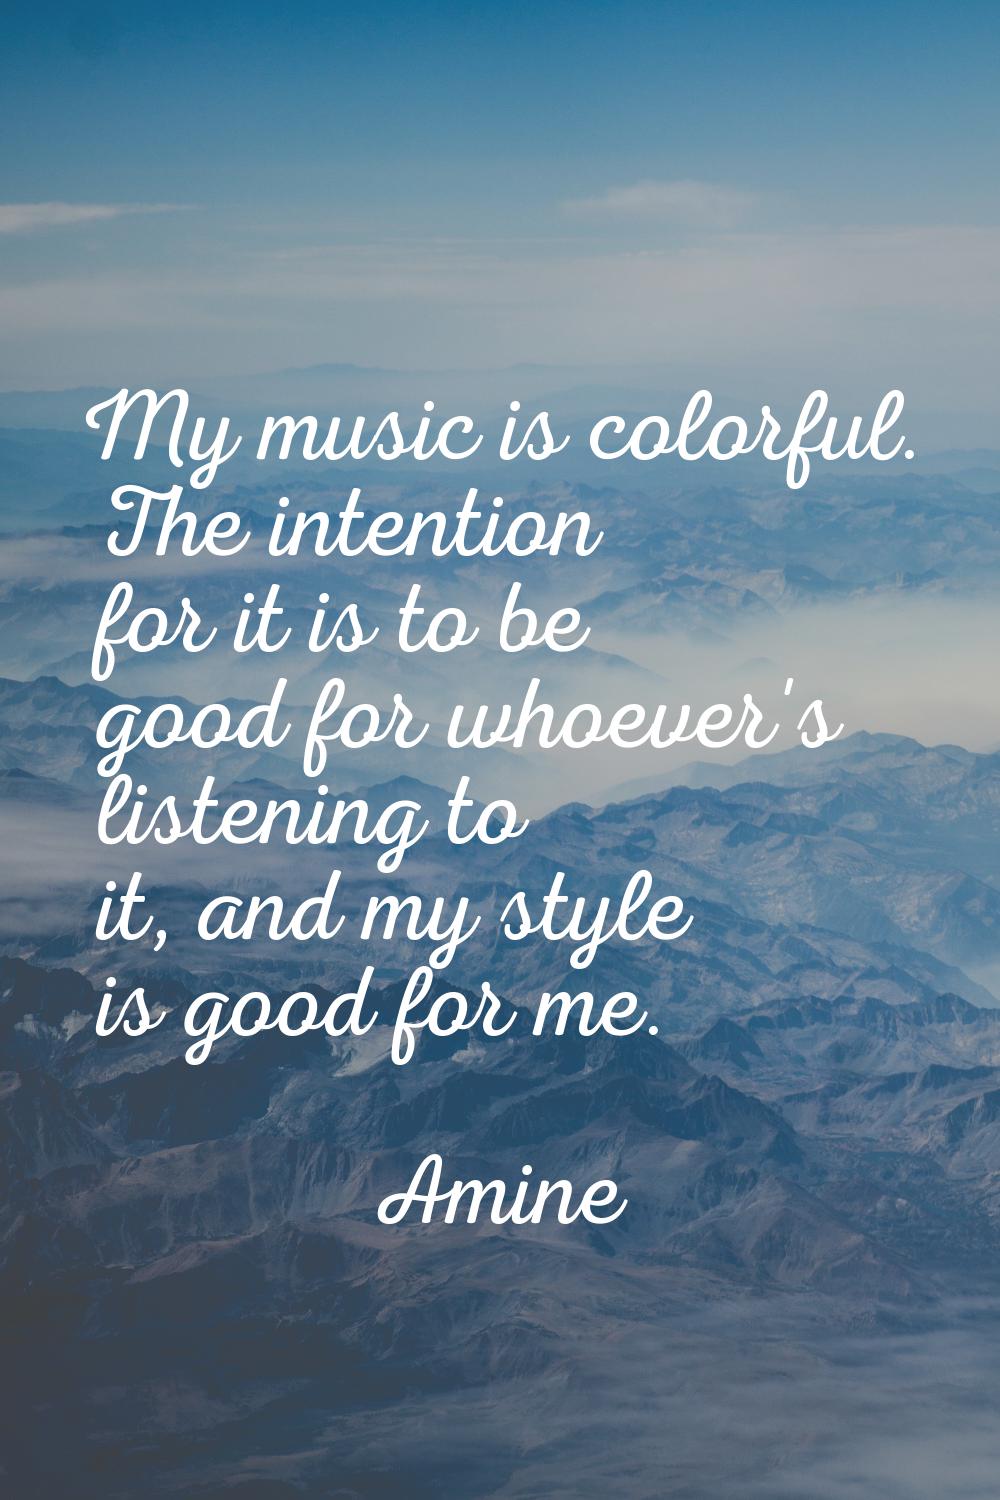 My music is colorful. The intention for it is to be good for whoever's listening to it, and my styl